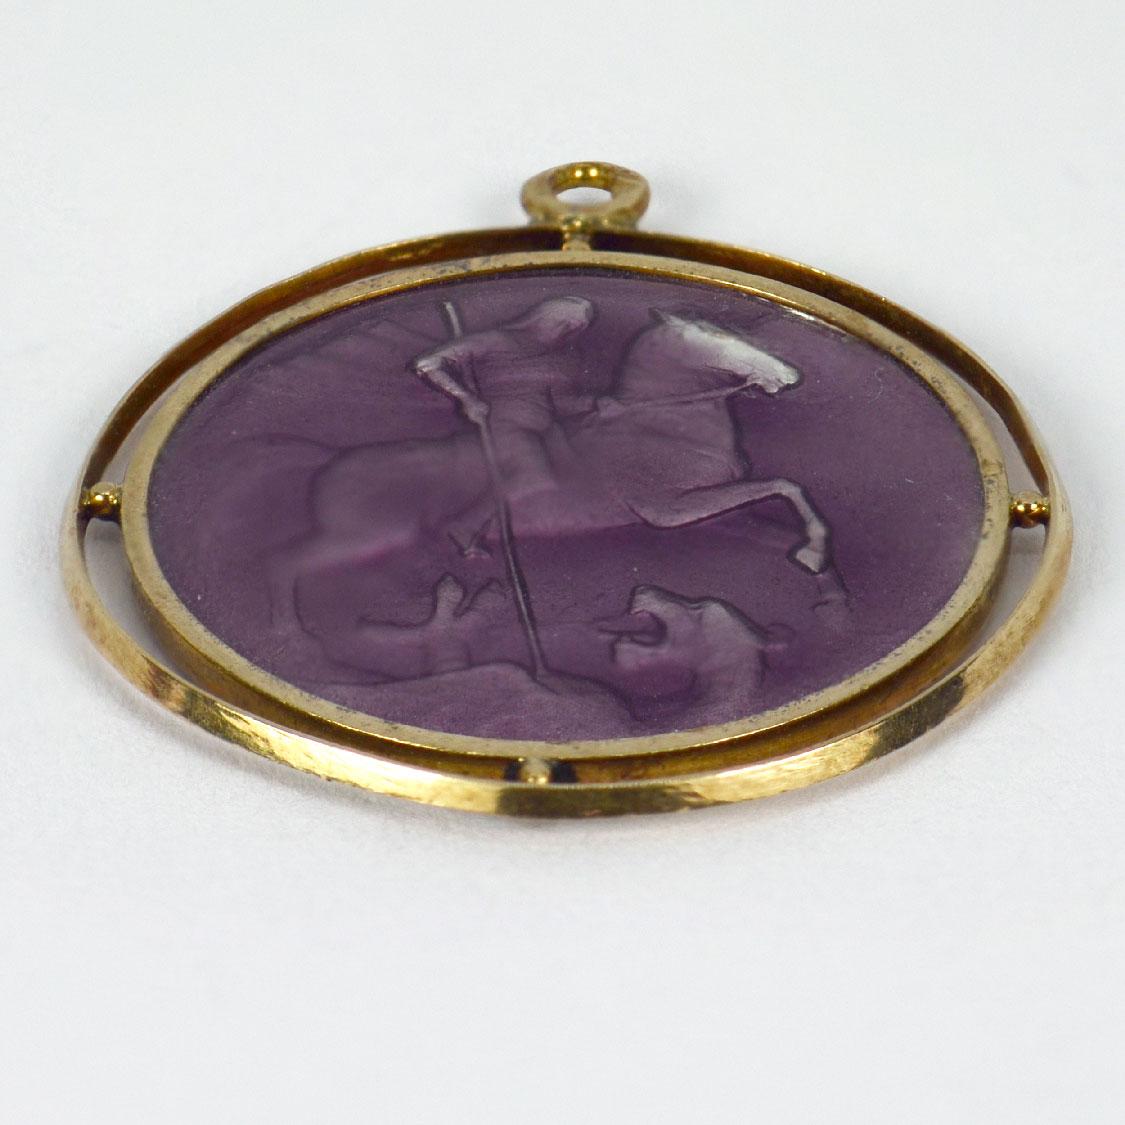 An 18 karat (18K) yellow and white gold pendant designed as a round medal depicting St George defeating the Dragon. With purple enamel and guilloche enamel reverse. Stamped with the eagle’s head for French manufacture and 18 karat gold. Enamel